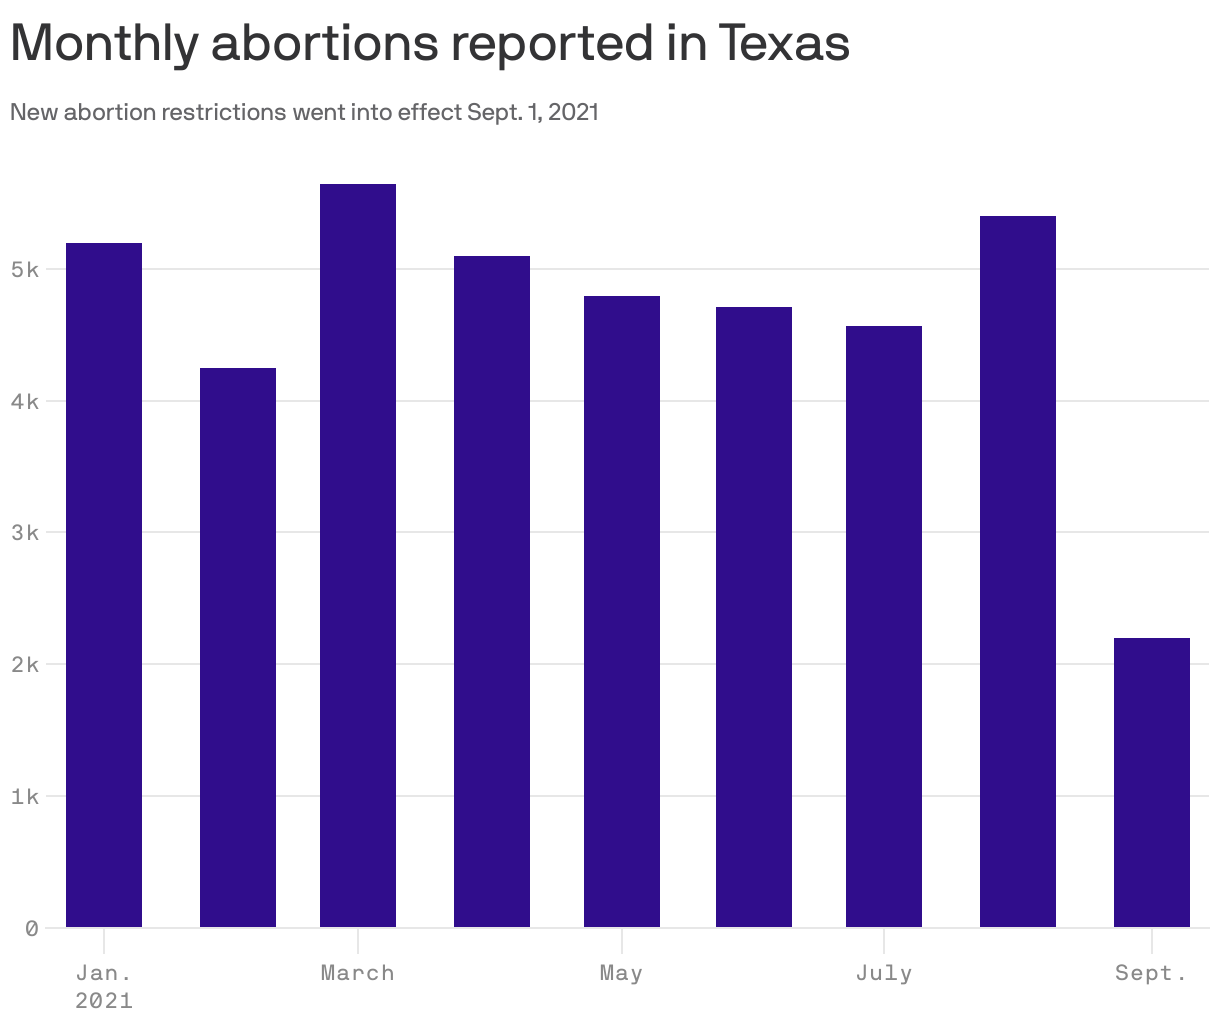 Monthly abortions reported in Texas